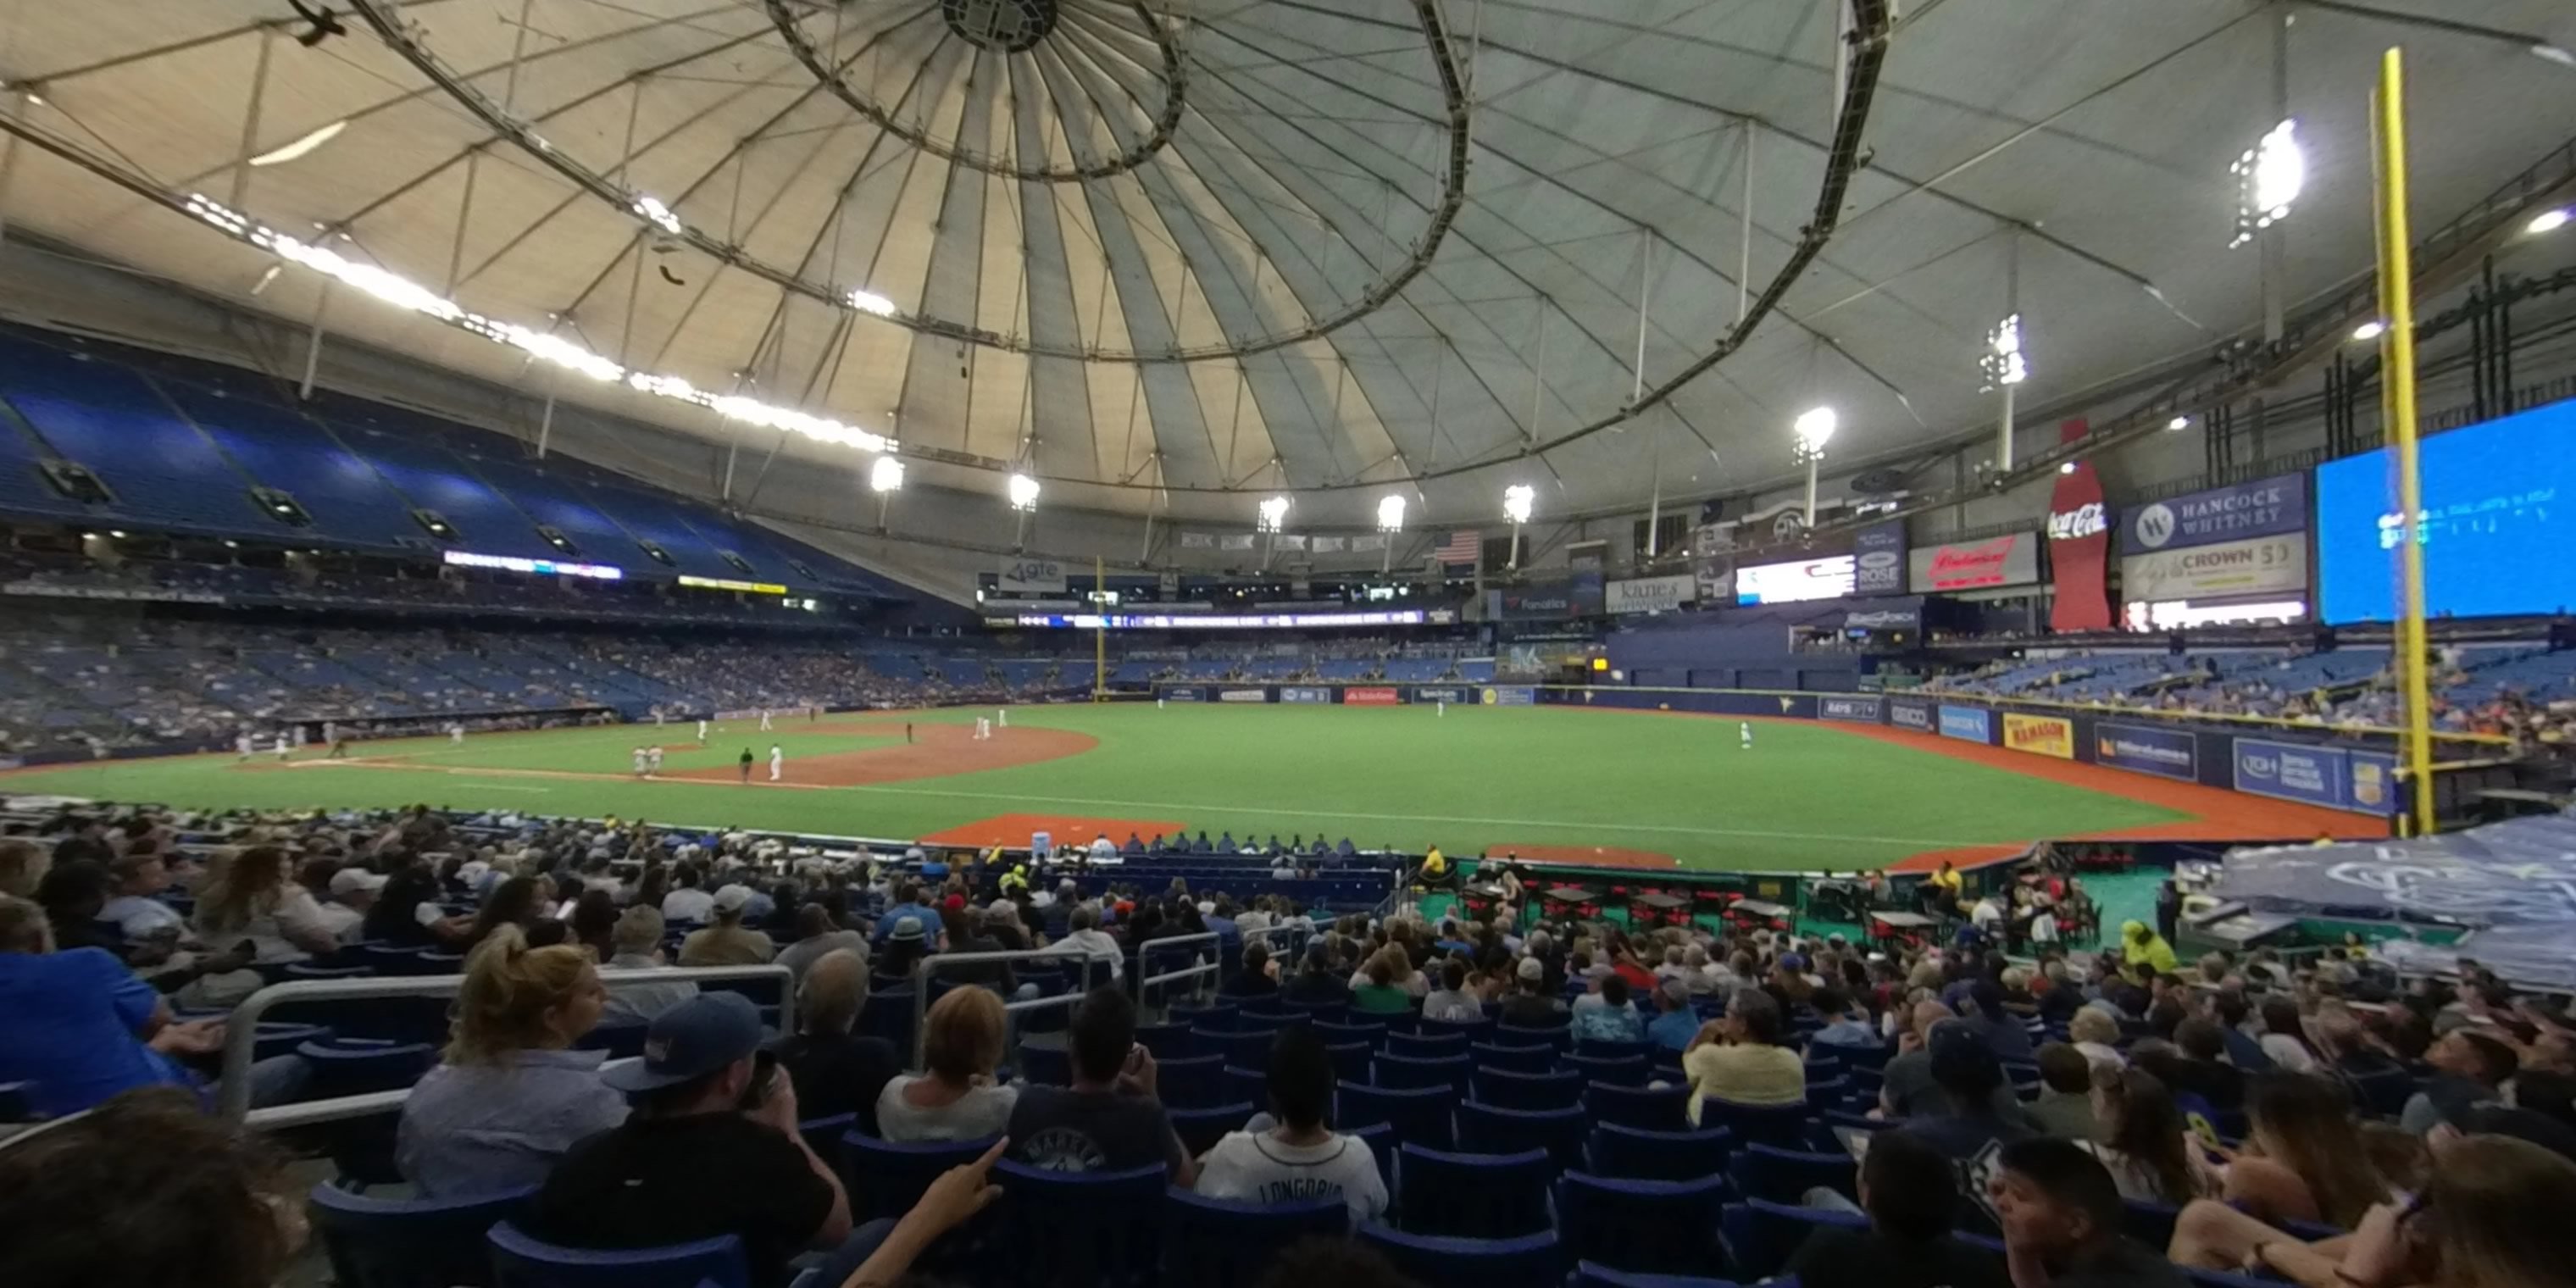 section 130 panoramic seat view  for baseball - tropicana field